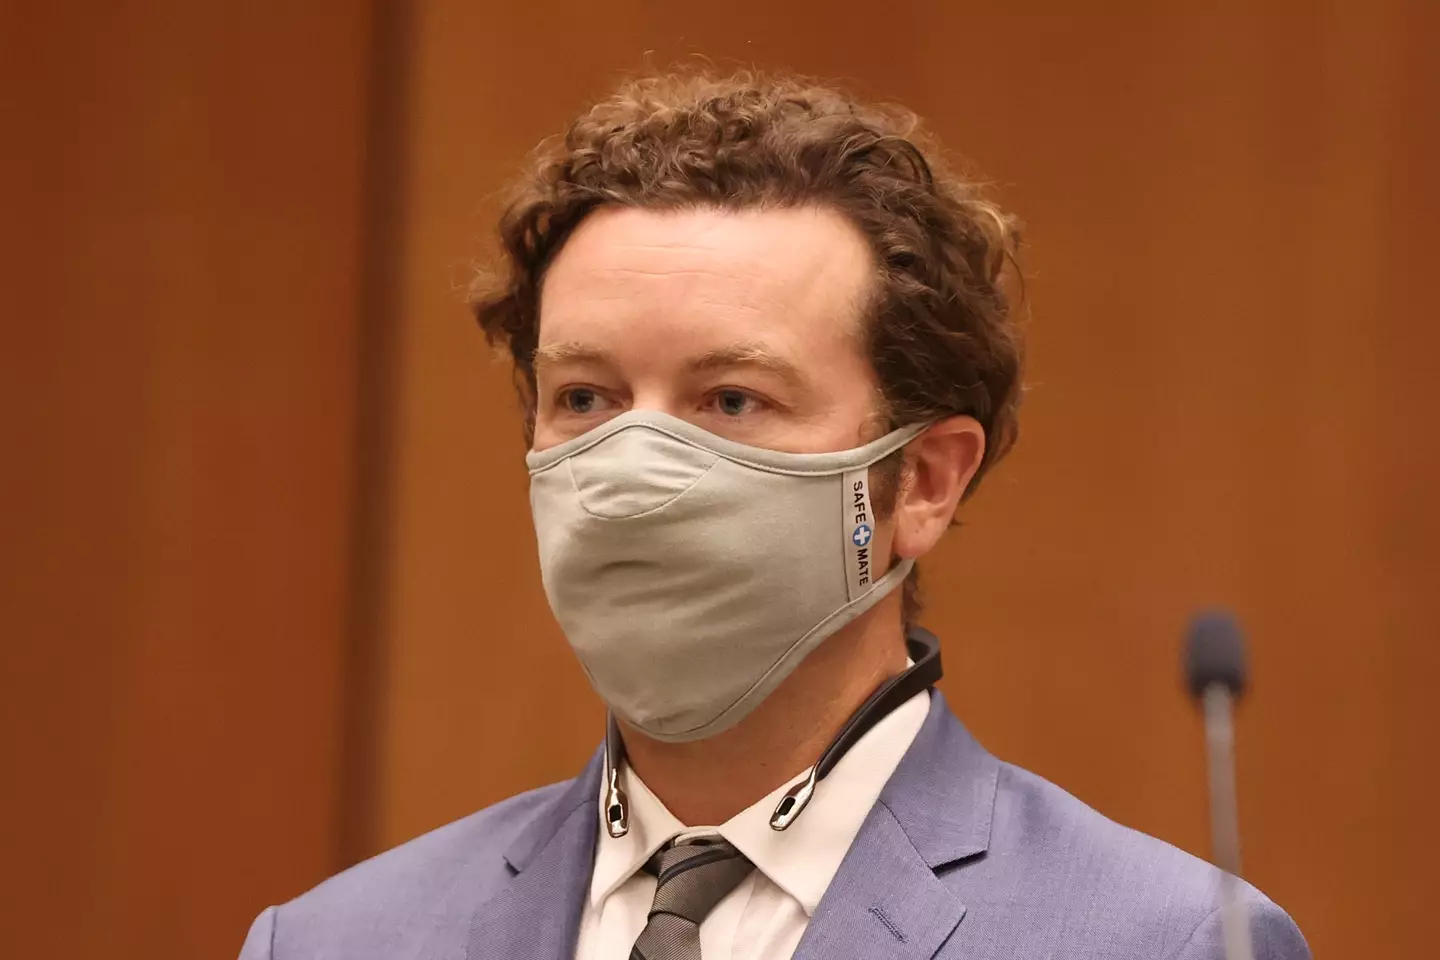 Danny Masterson was sentenced to 30 years in prison.